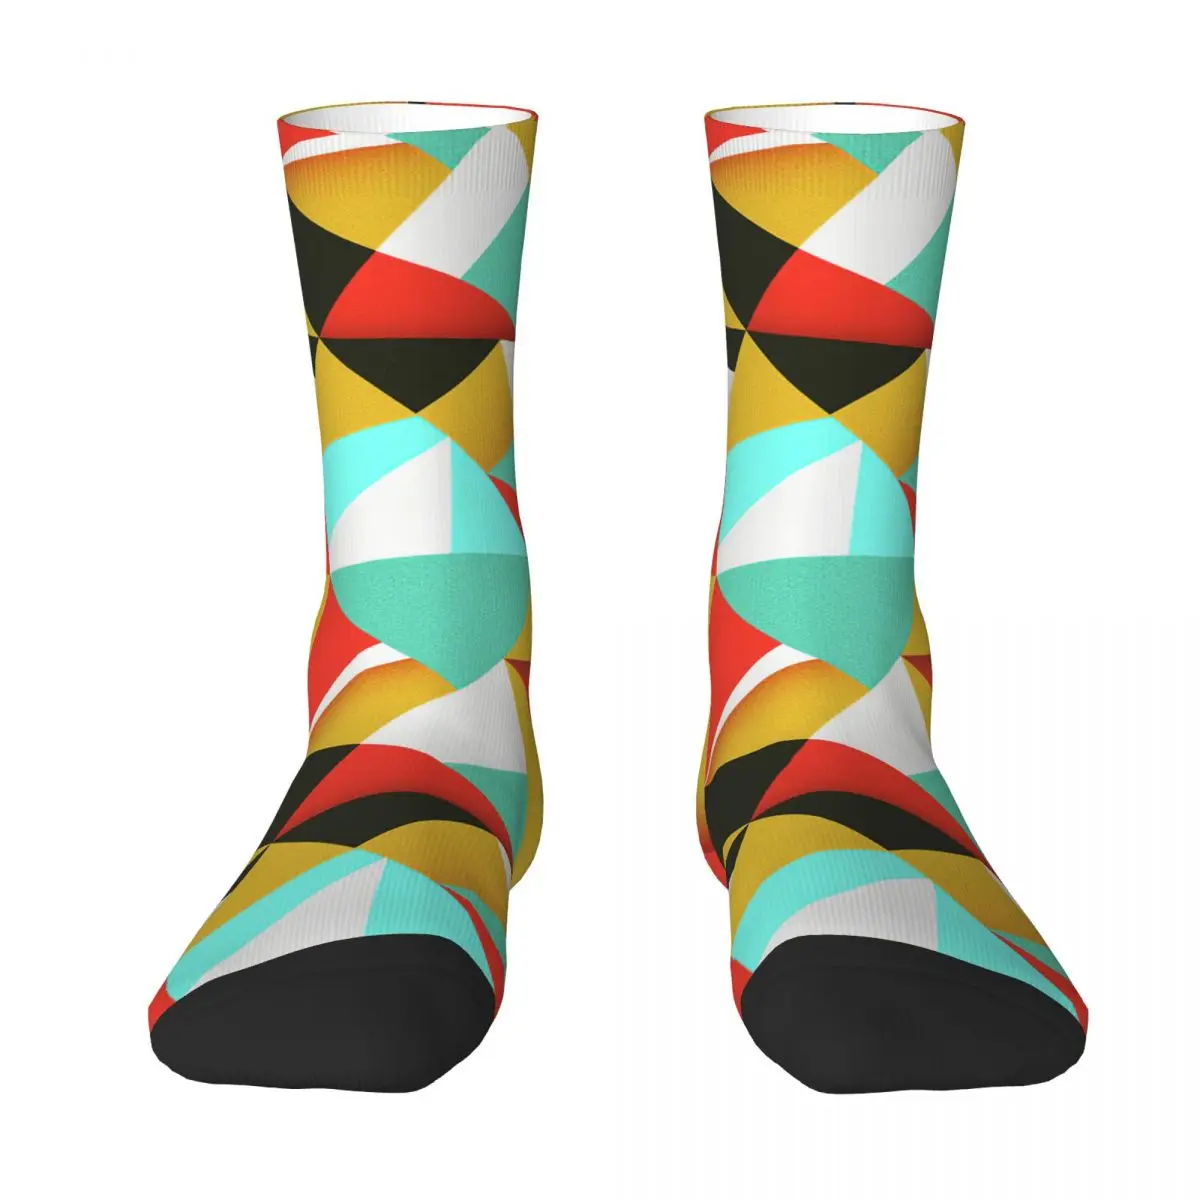 Seamless Colorful Abstract Retro Shapes Adult Socks,Unisex socks,men Socks women Socks men socks retro women vinci van gogh statue of liberty art starry night oil painting socks casual colorful happy funny socks